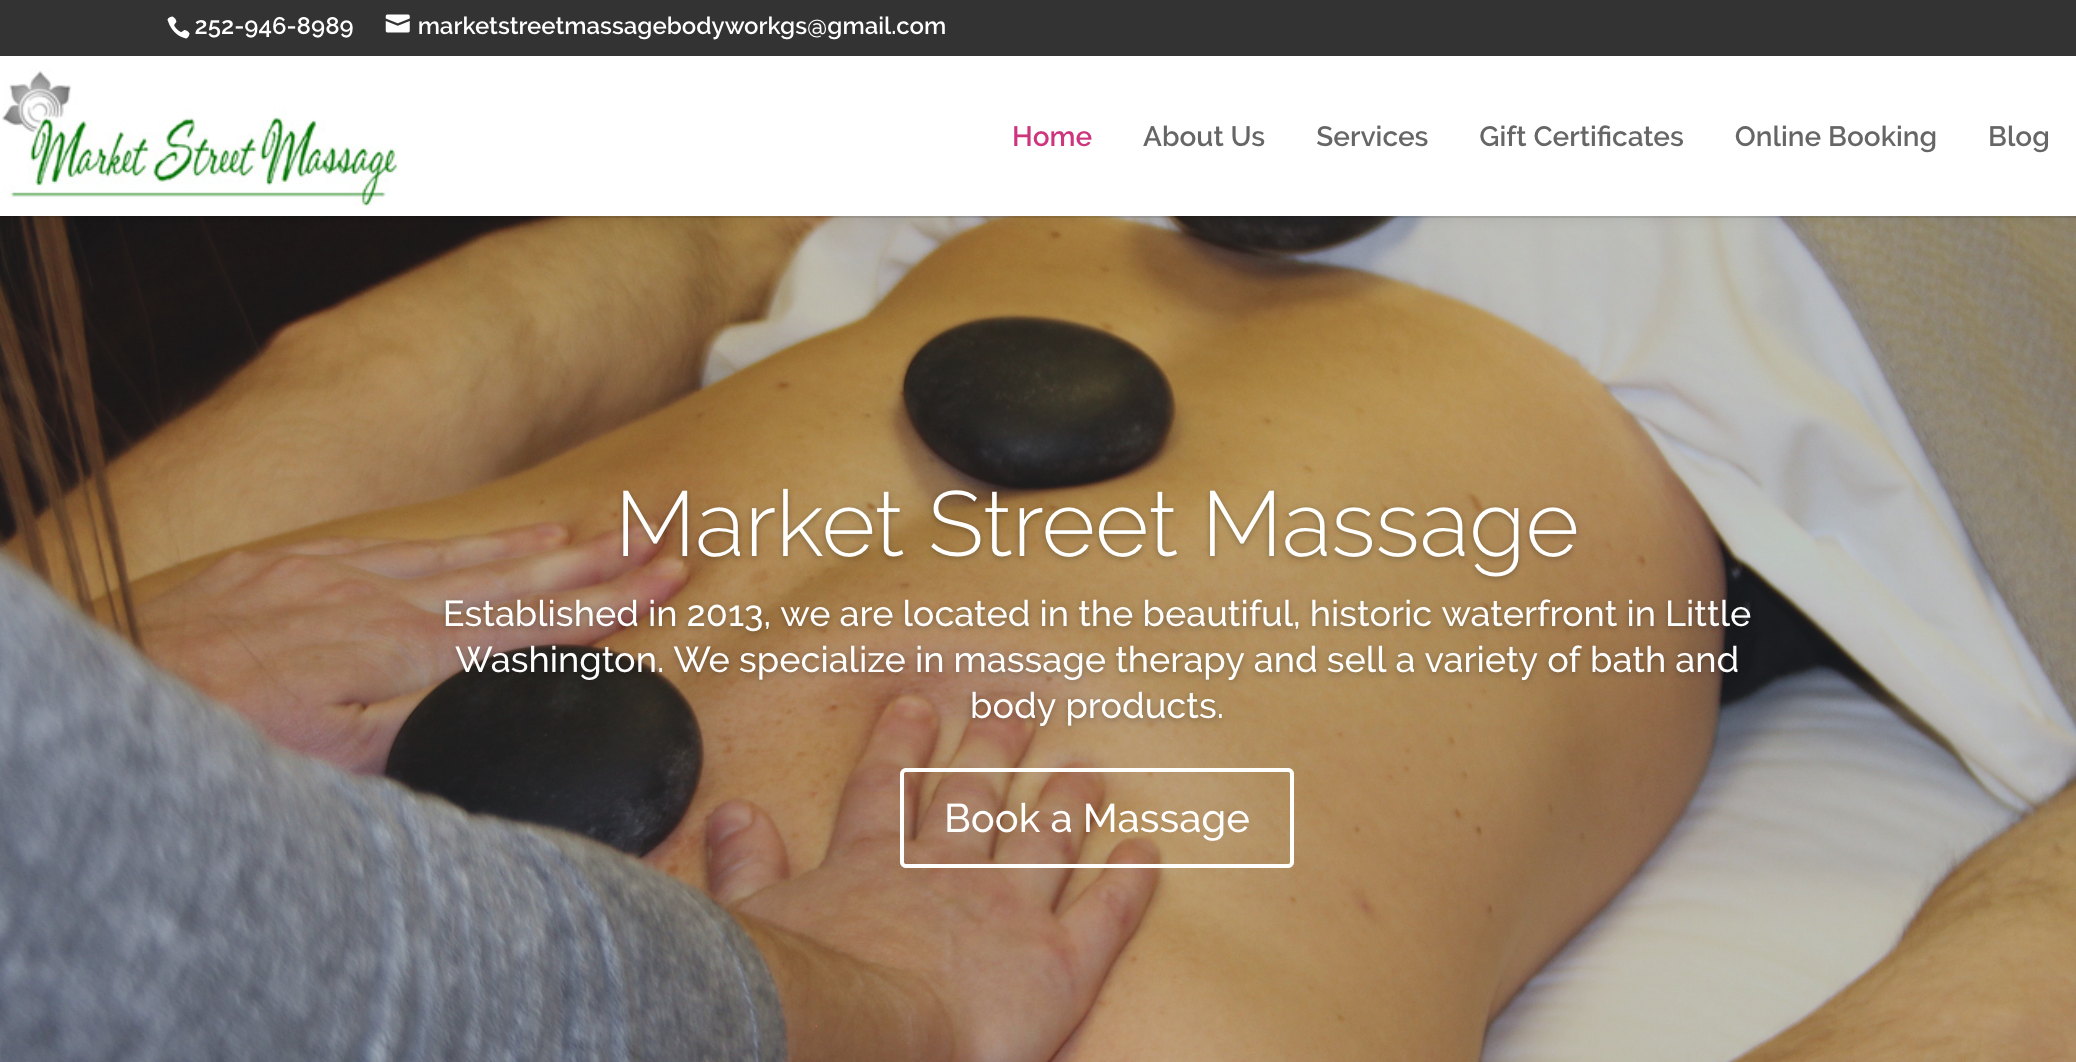 A screenshot of the Market Street Massage website, published to 